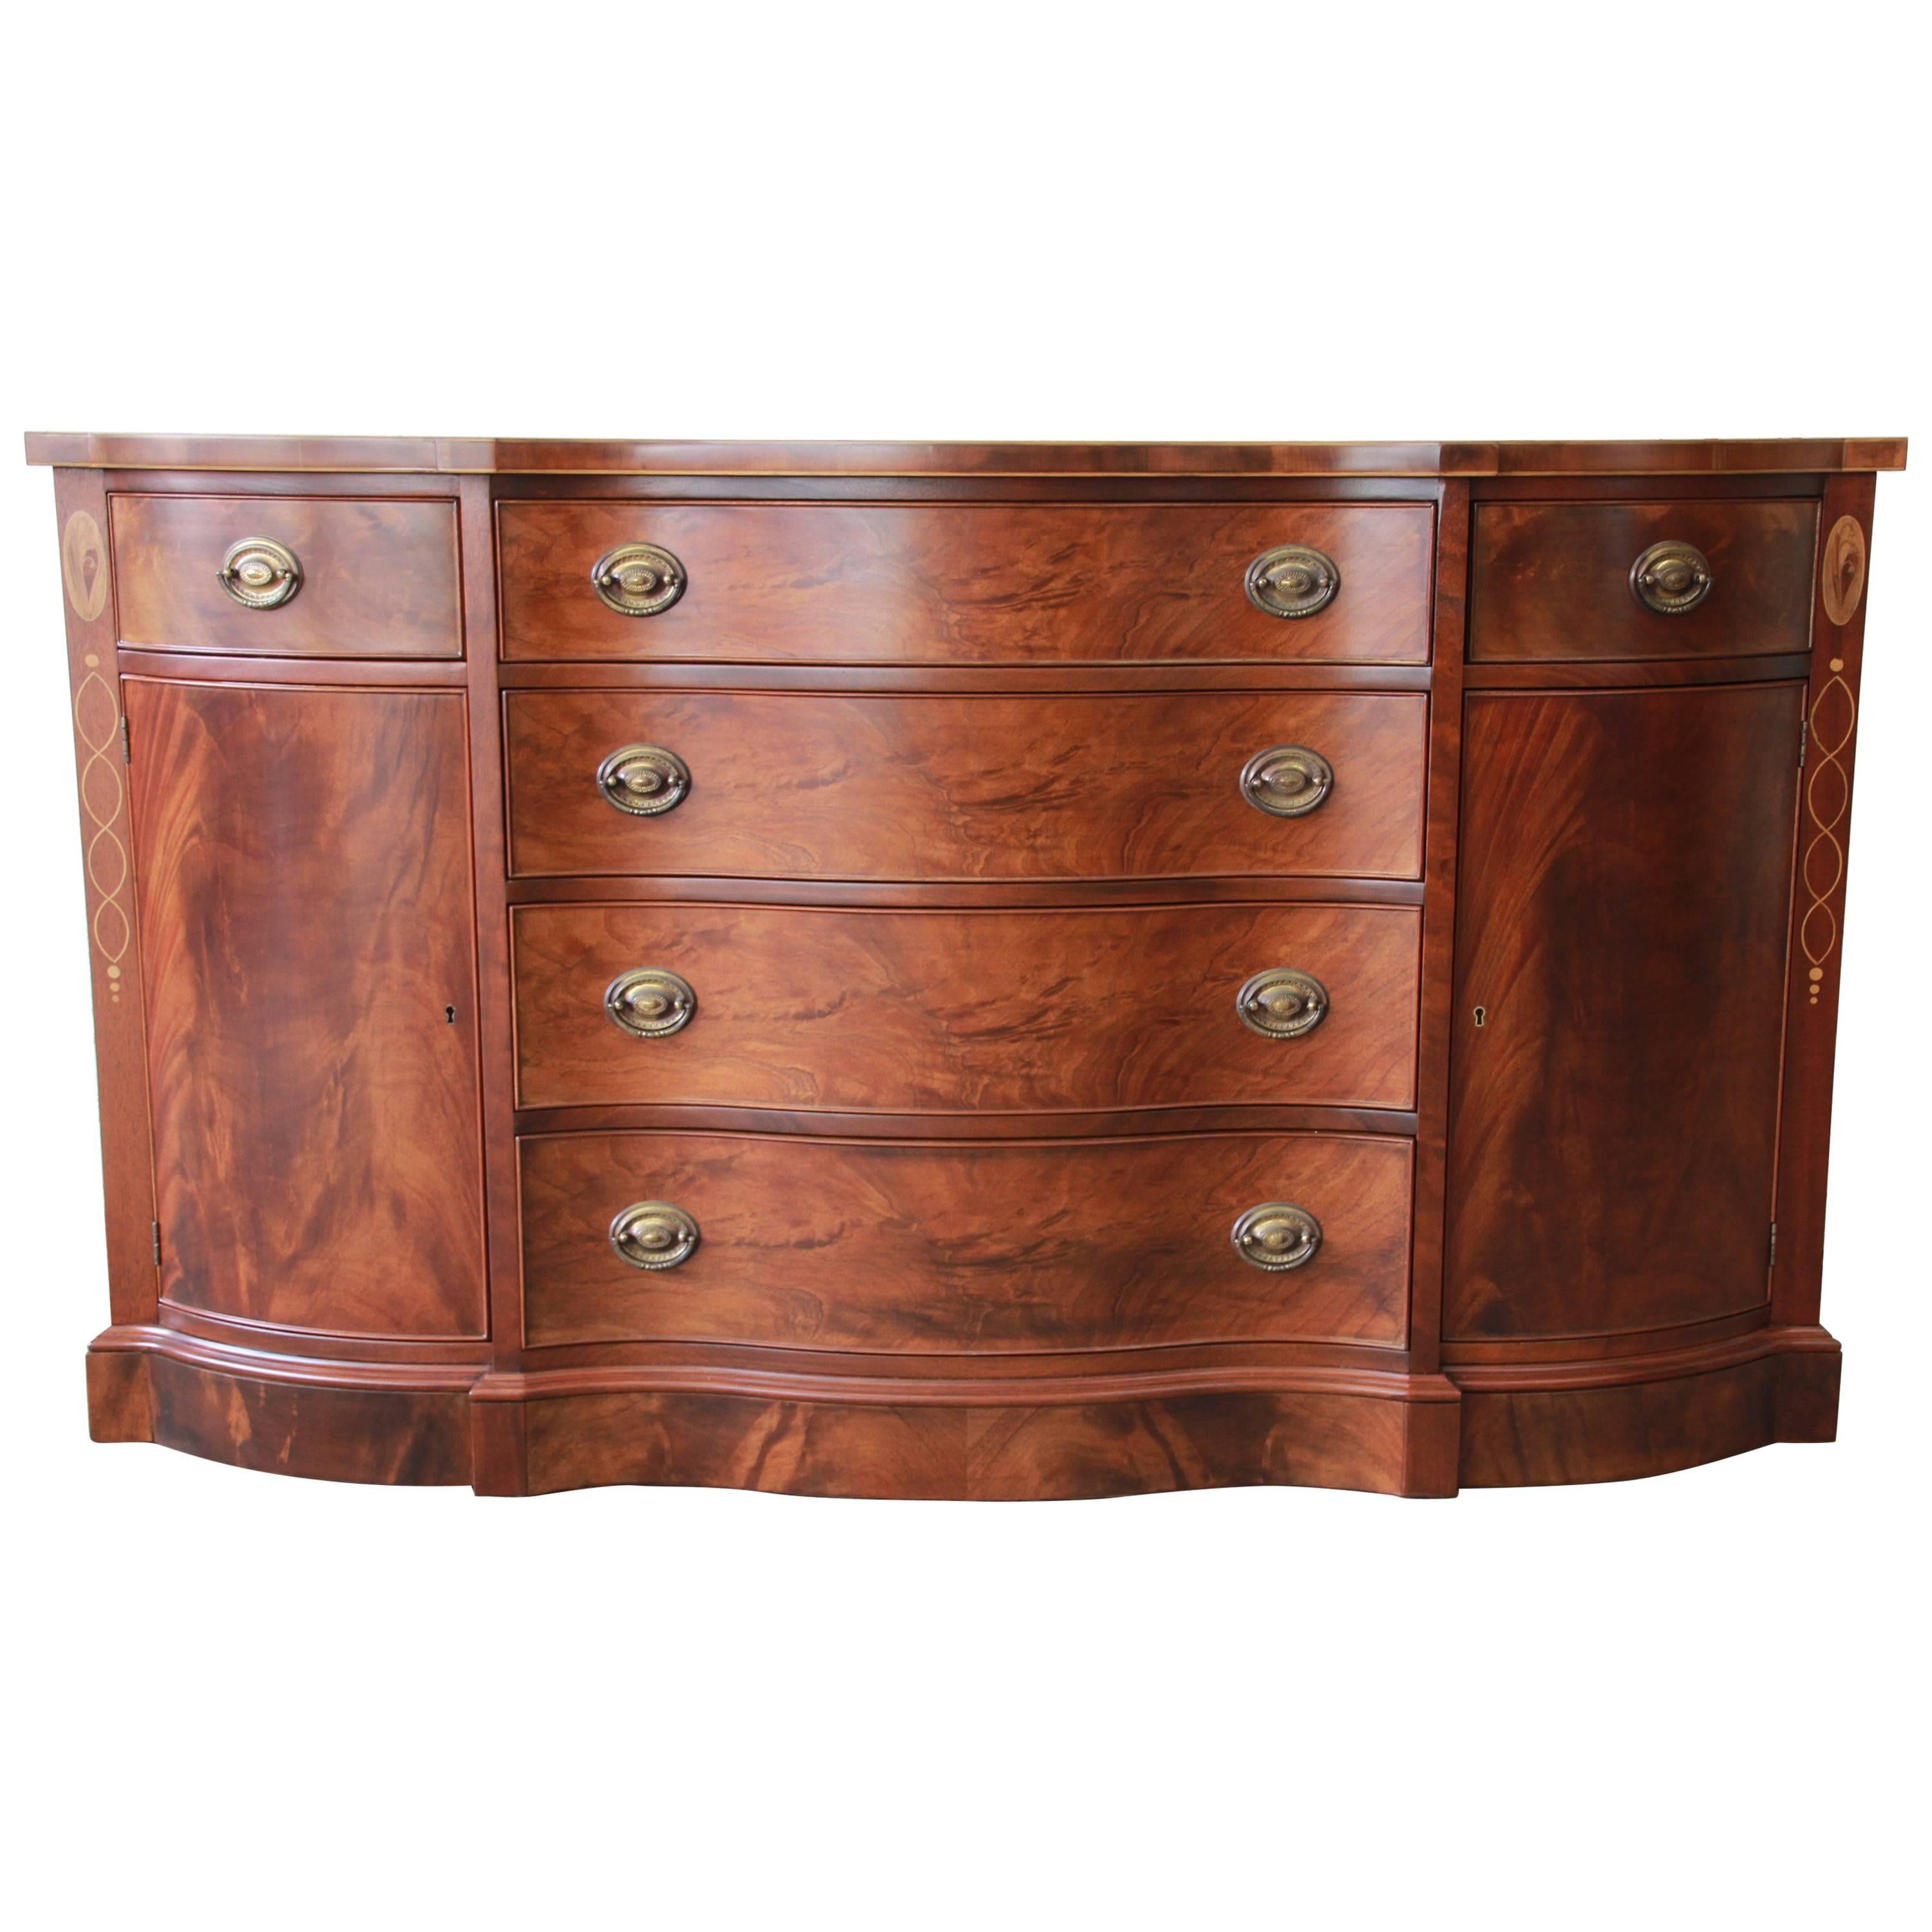 Drexel Furniture Wallace Nutting Collection Inlaid Walnut Sideboard Buffet